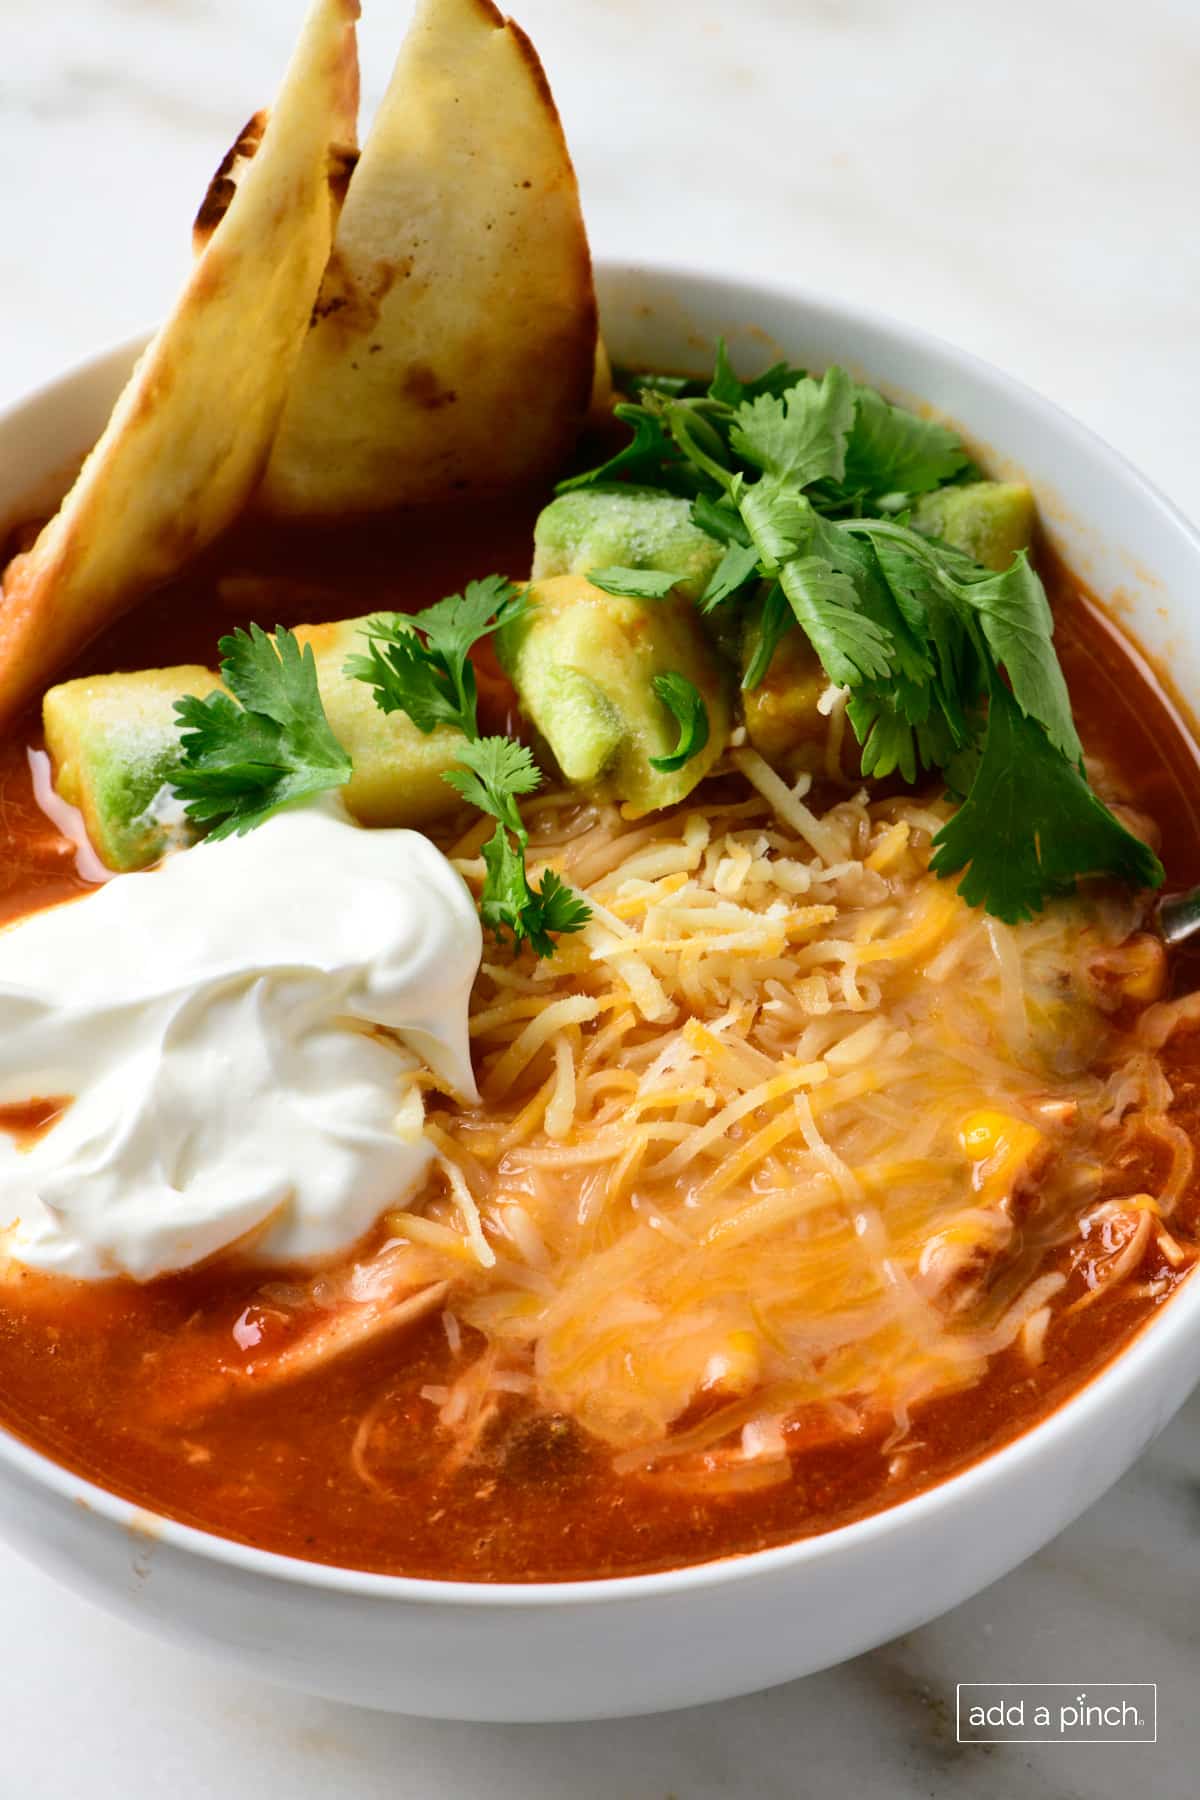 Bowl of chicken tortilla soup garnished with tortilla strips, avocados, sour cream, and shredded cheese, served in a white bowl.